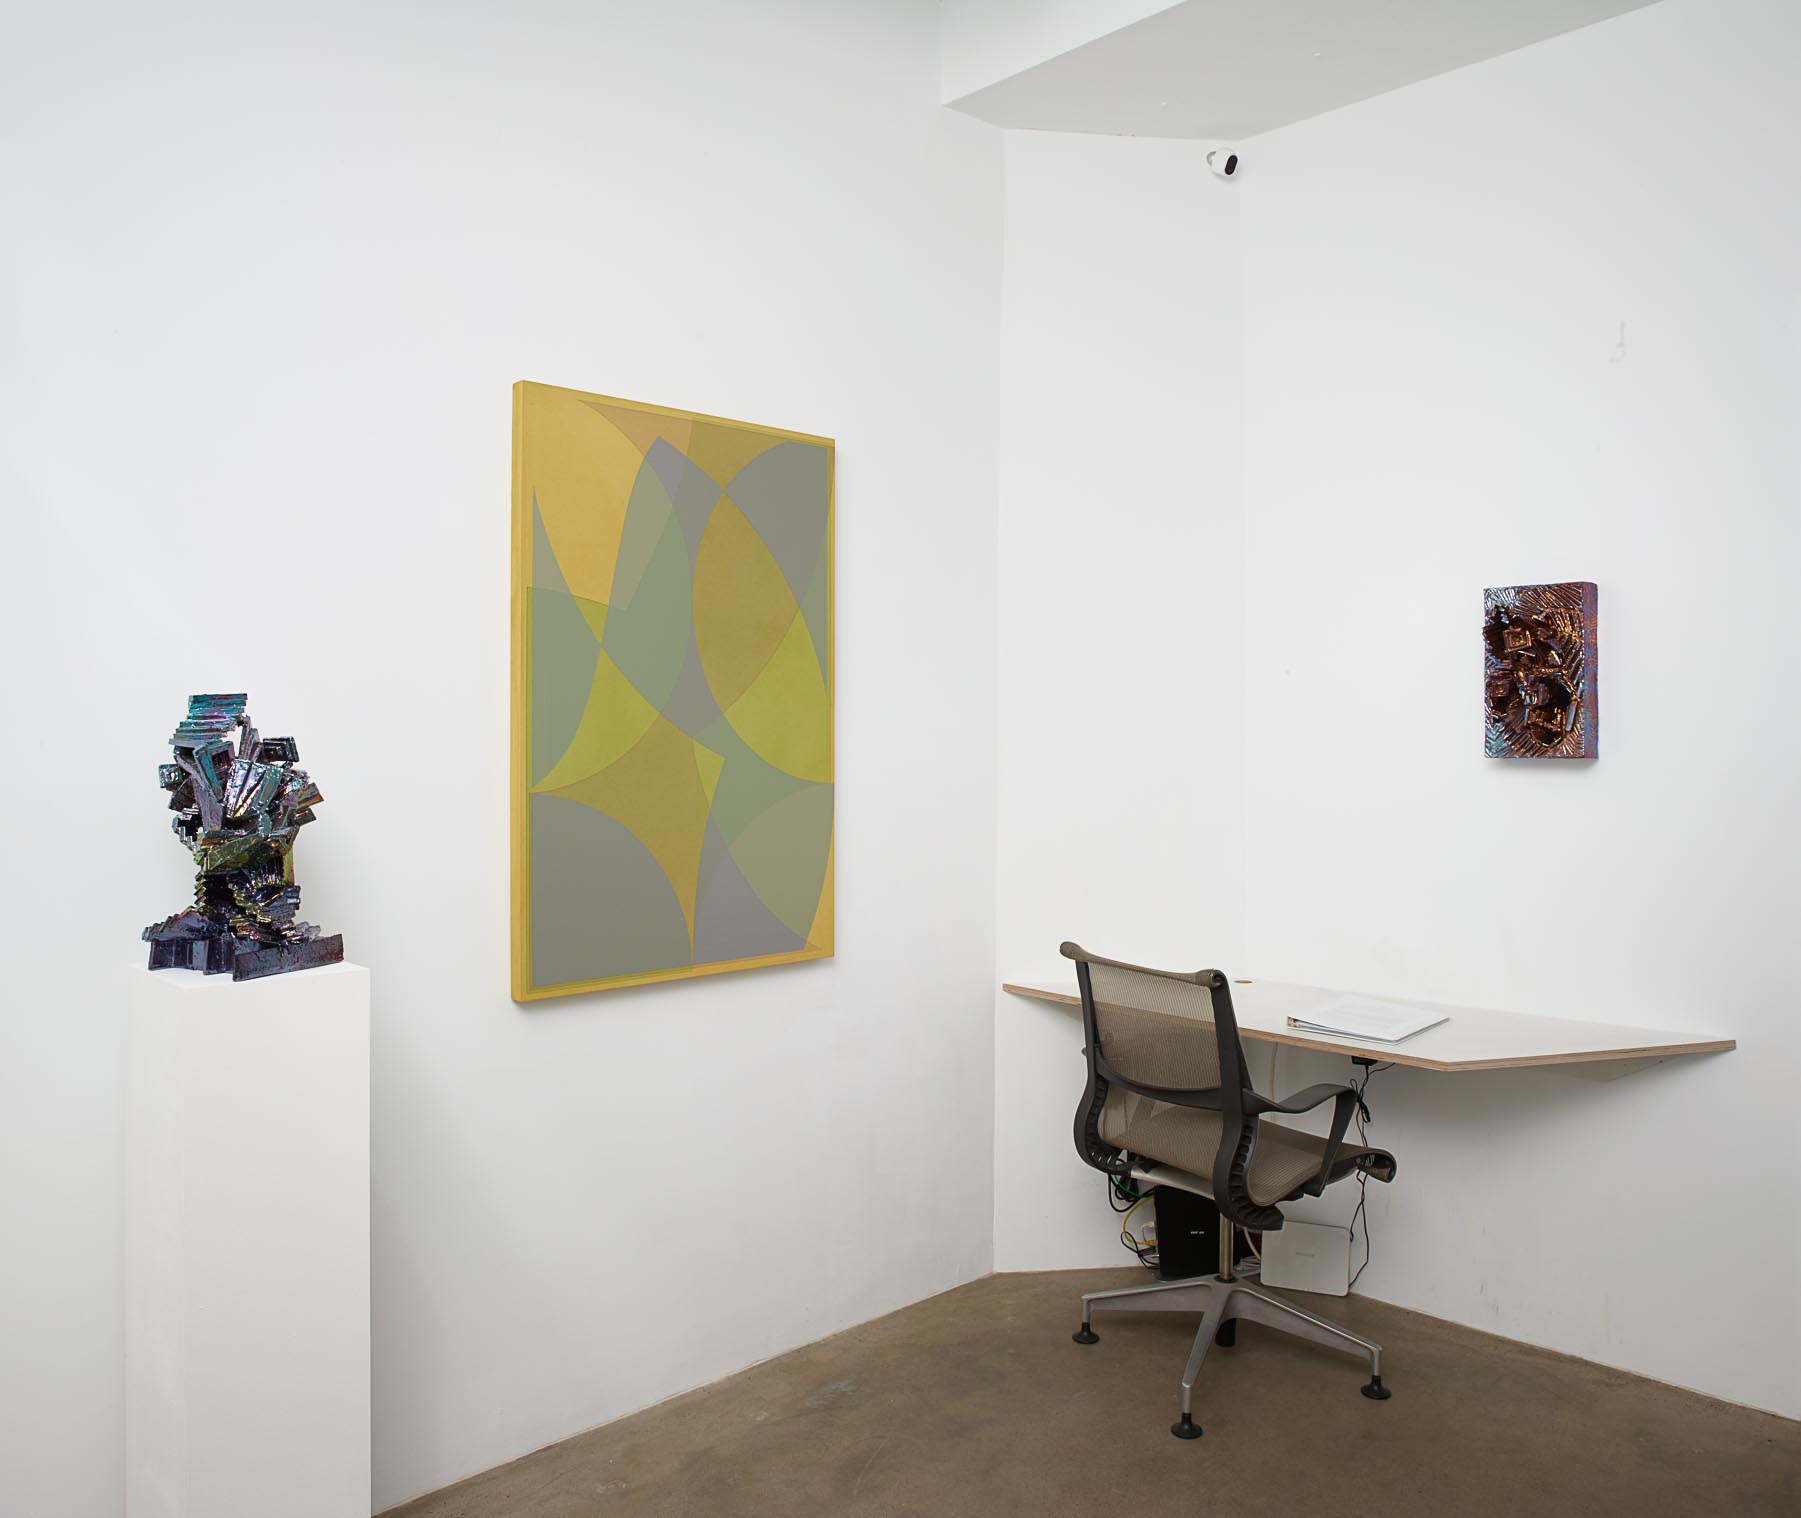 Installation view featuring sculptures by Julia Kunin and paintings by Halsey Hathaway